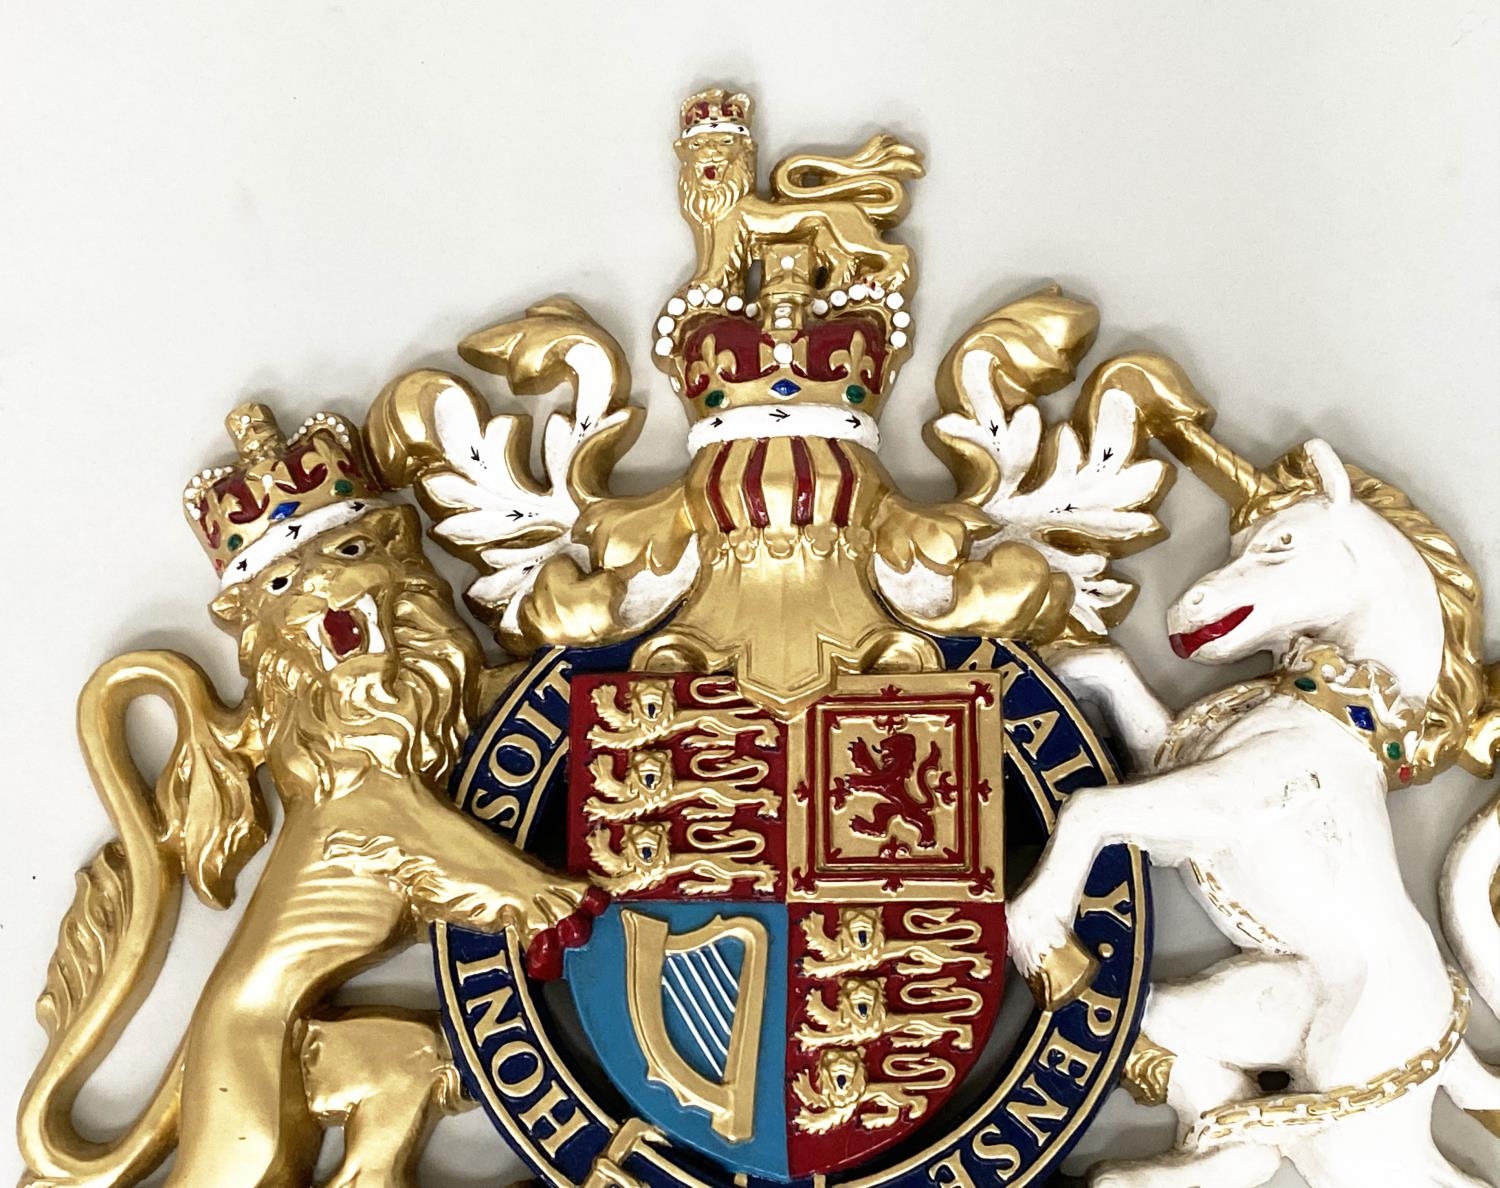 ROYAL COAT OF ARMS, painted fiberglass armorial coat of arms, 38cm x 41cm. - Image 3 of 4